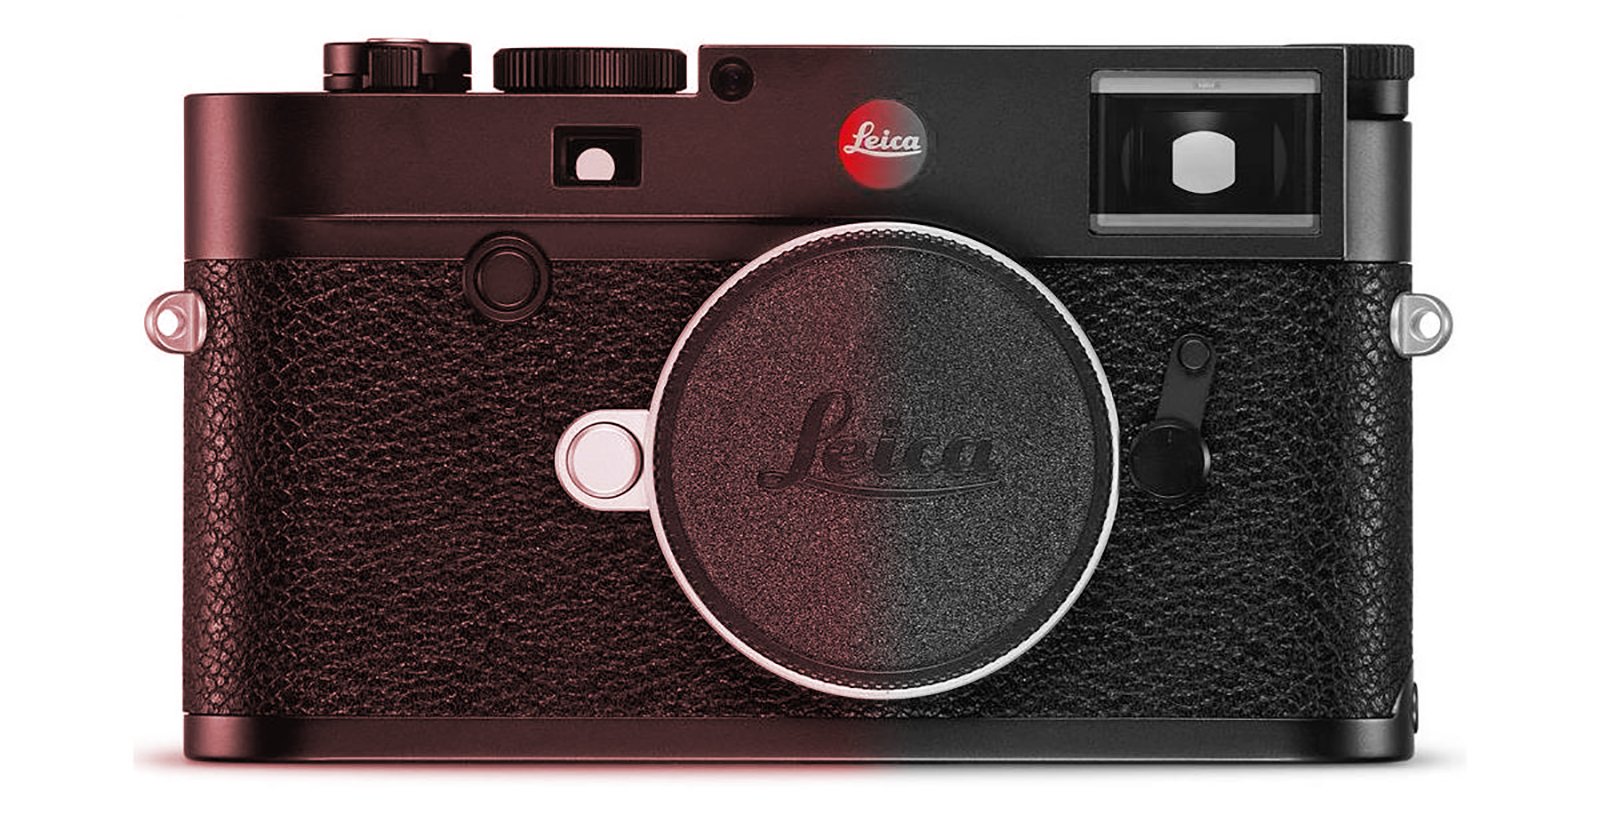 Leica Is Working On A New Monochrom Camera With A 41mp Sensor Report